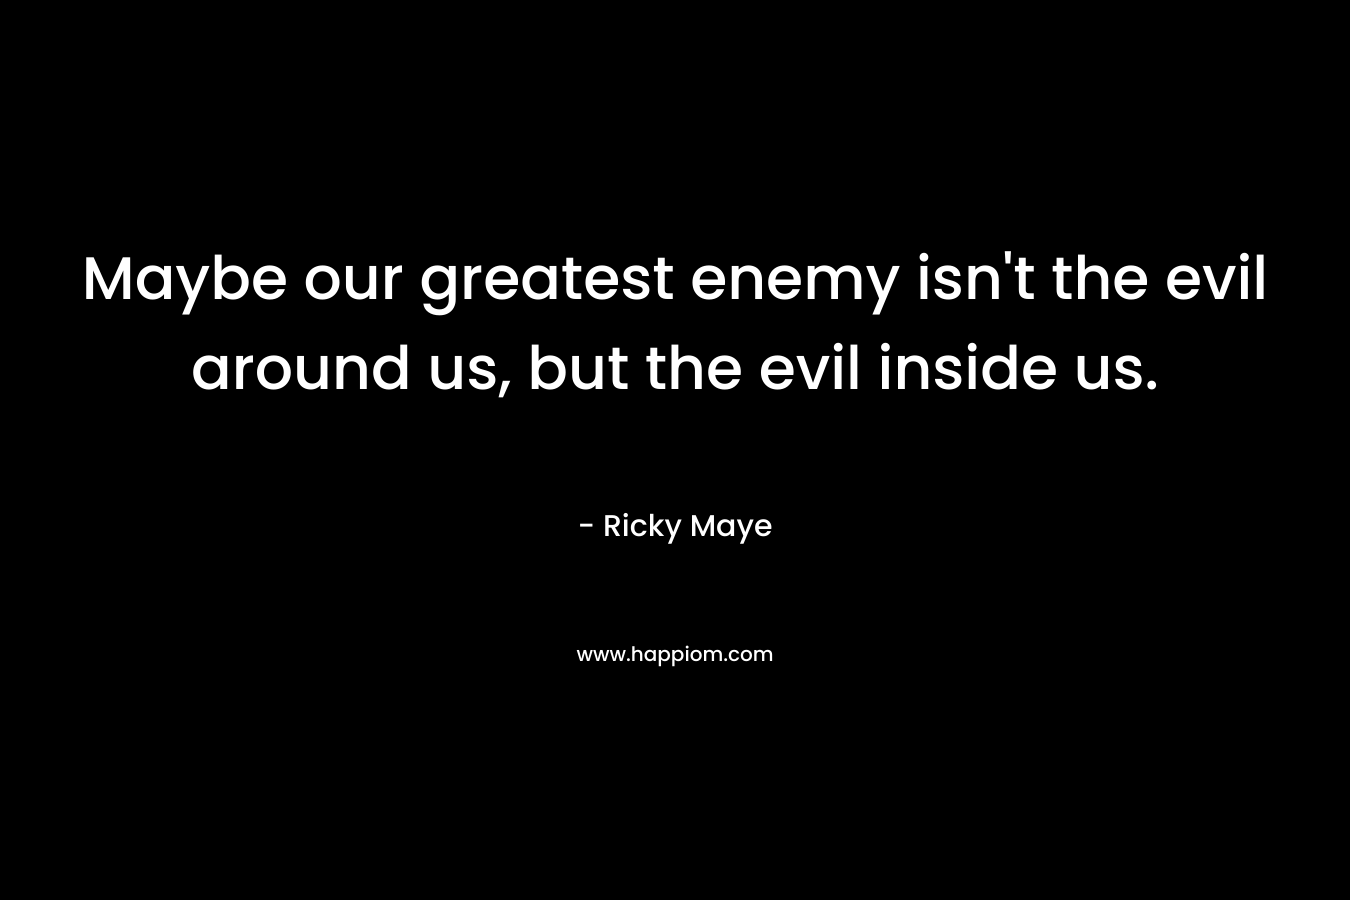 Maybe our greatest enemy isn't the evil around us, but the evil inside us.